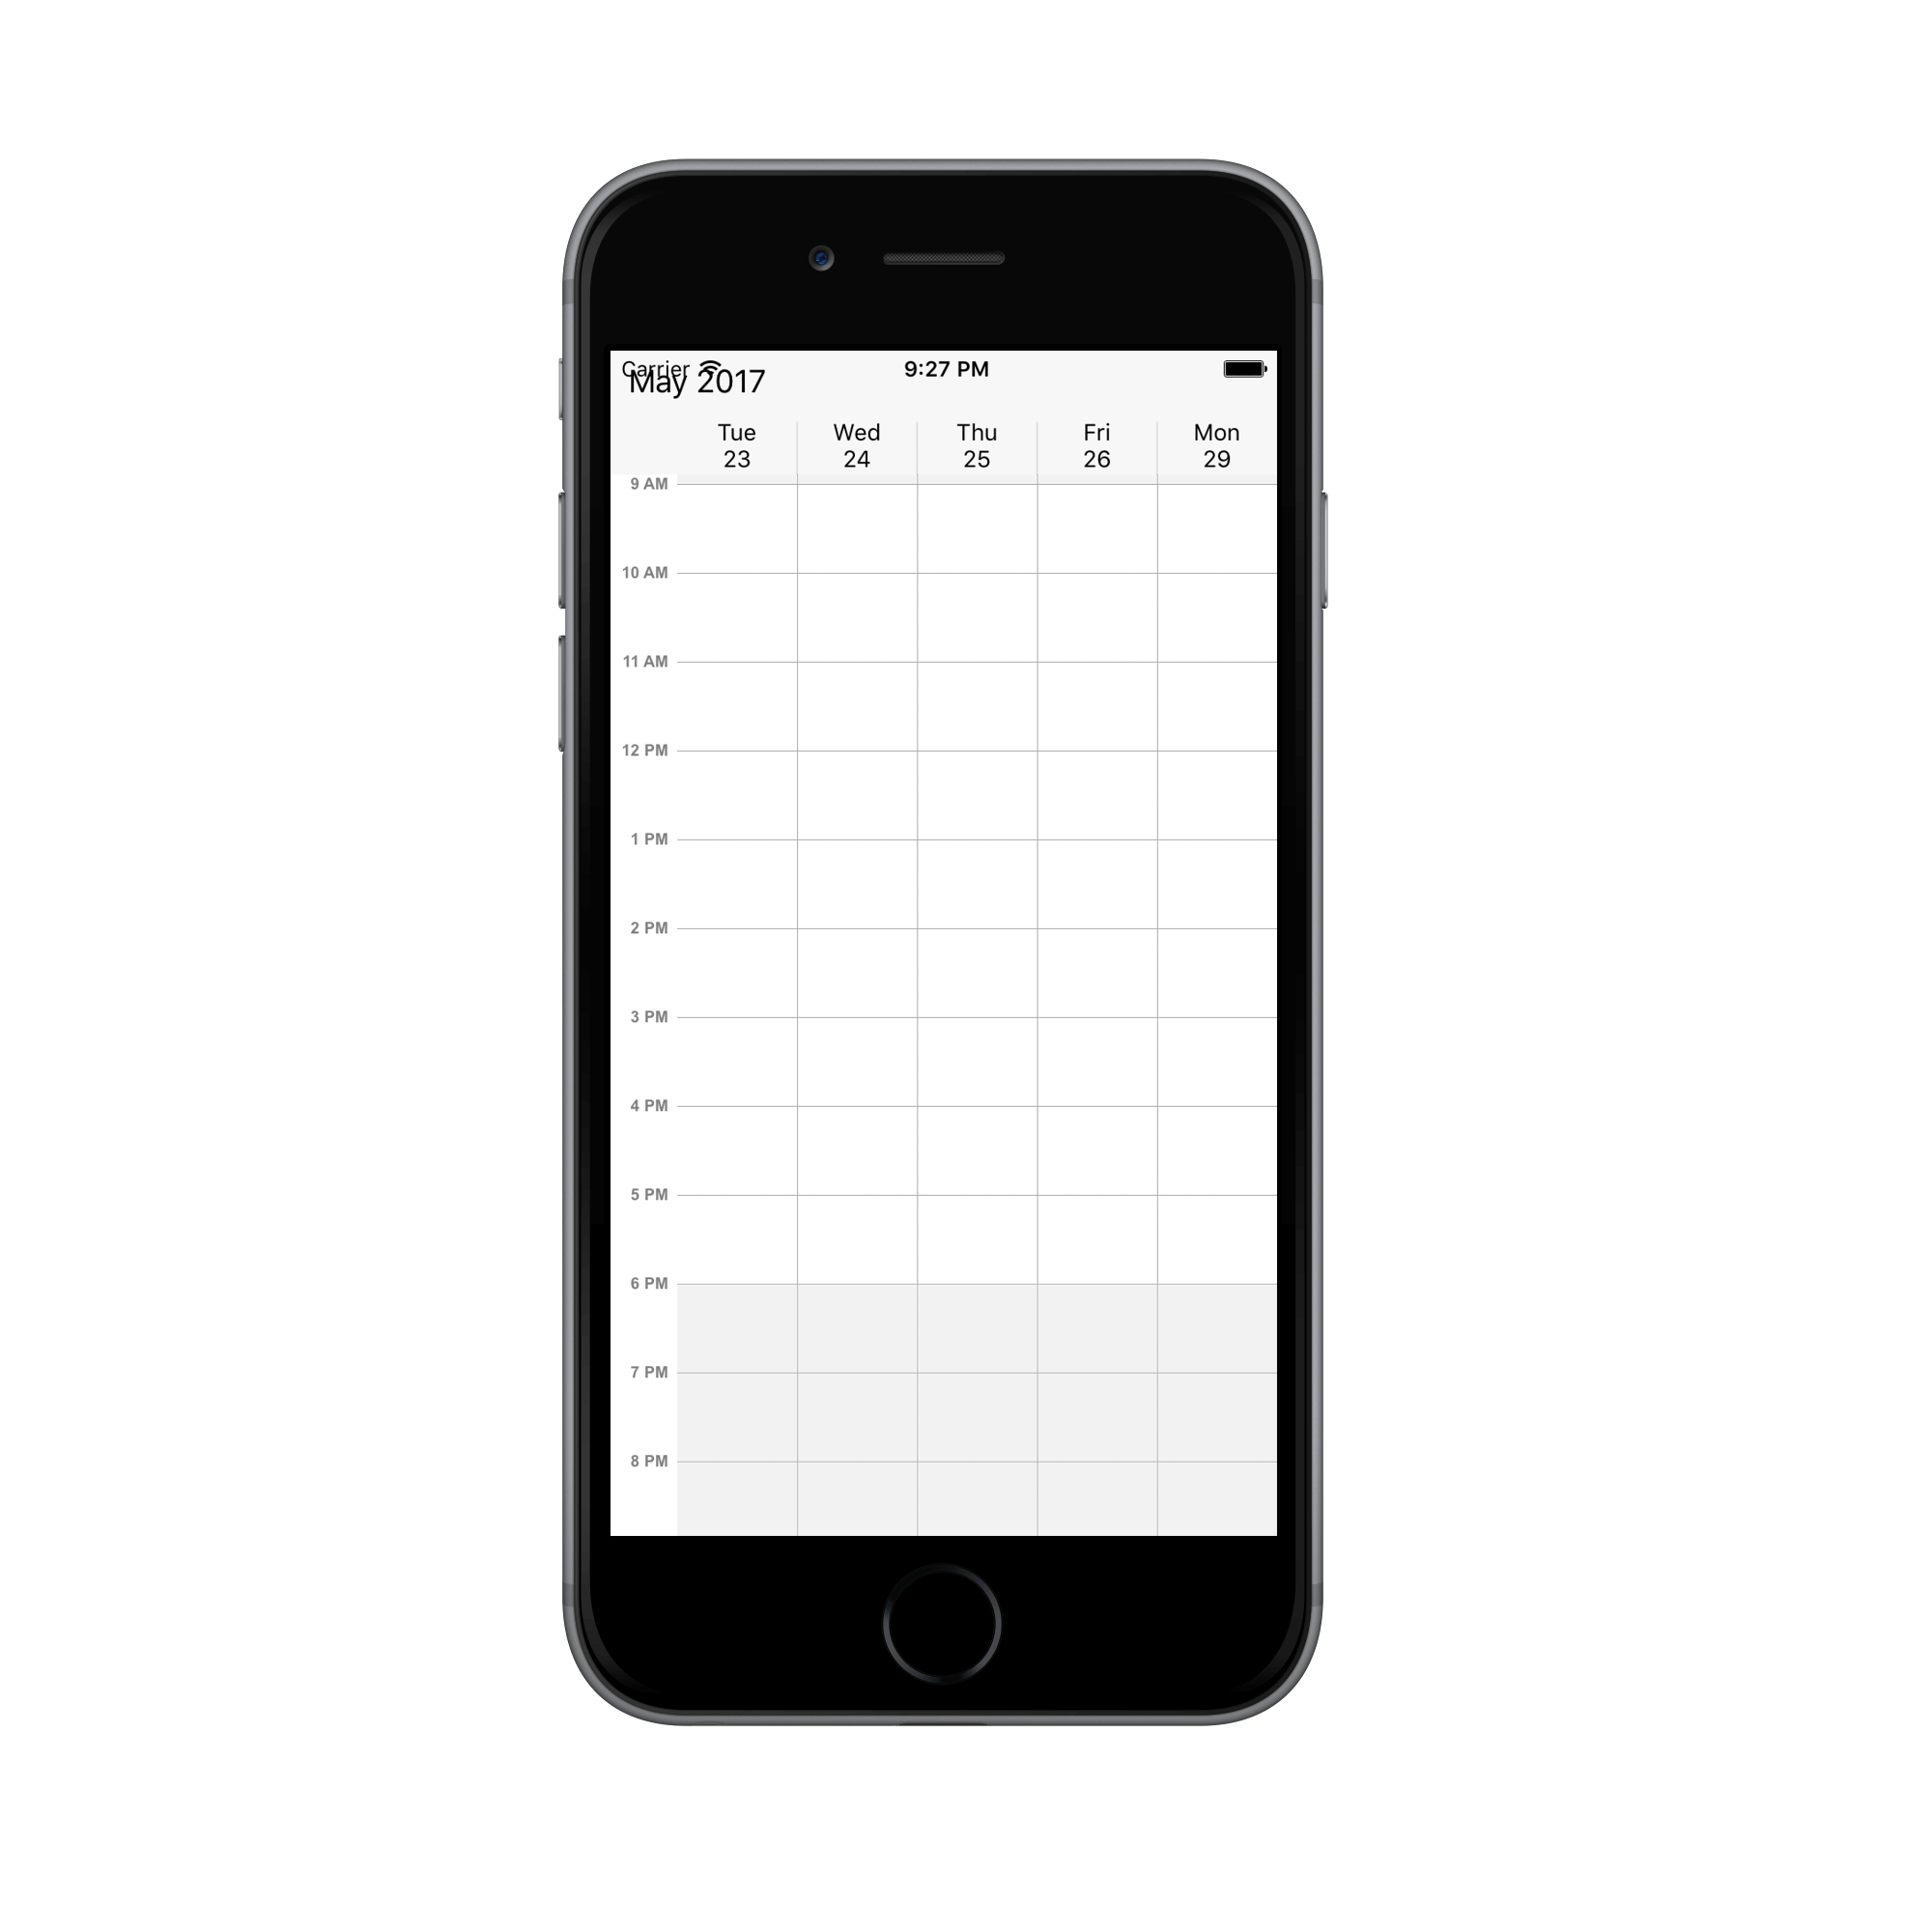 First day of week for work week view in schedule for Xamarin.iOS